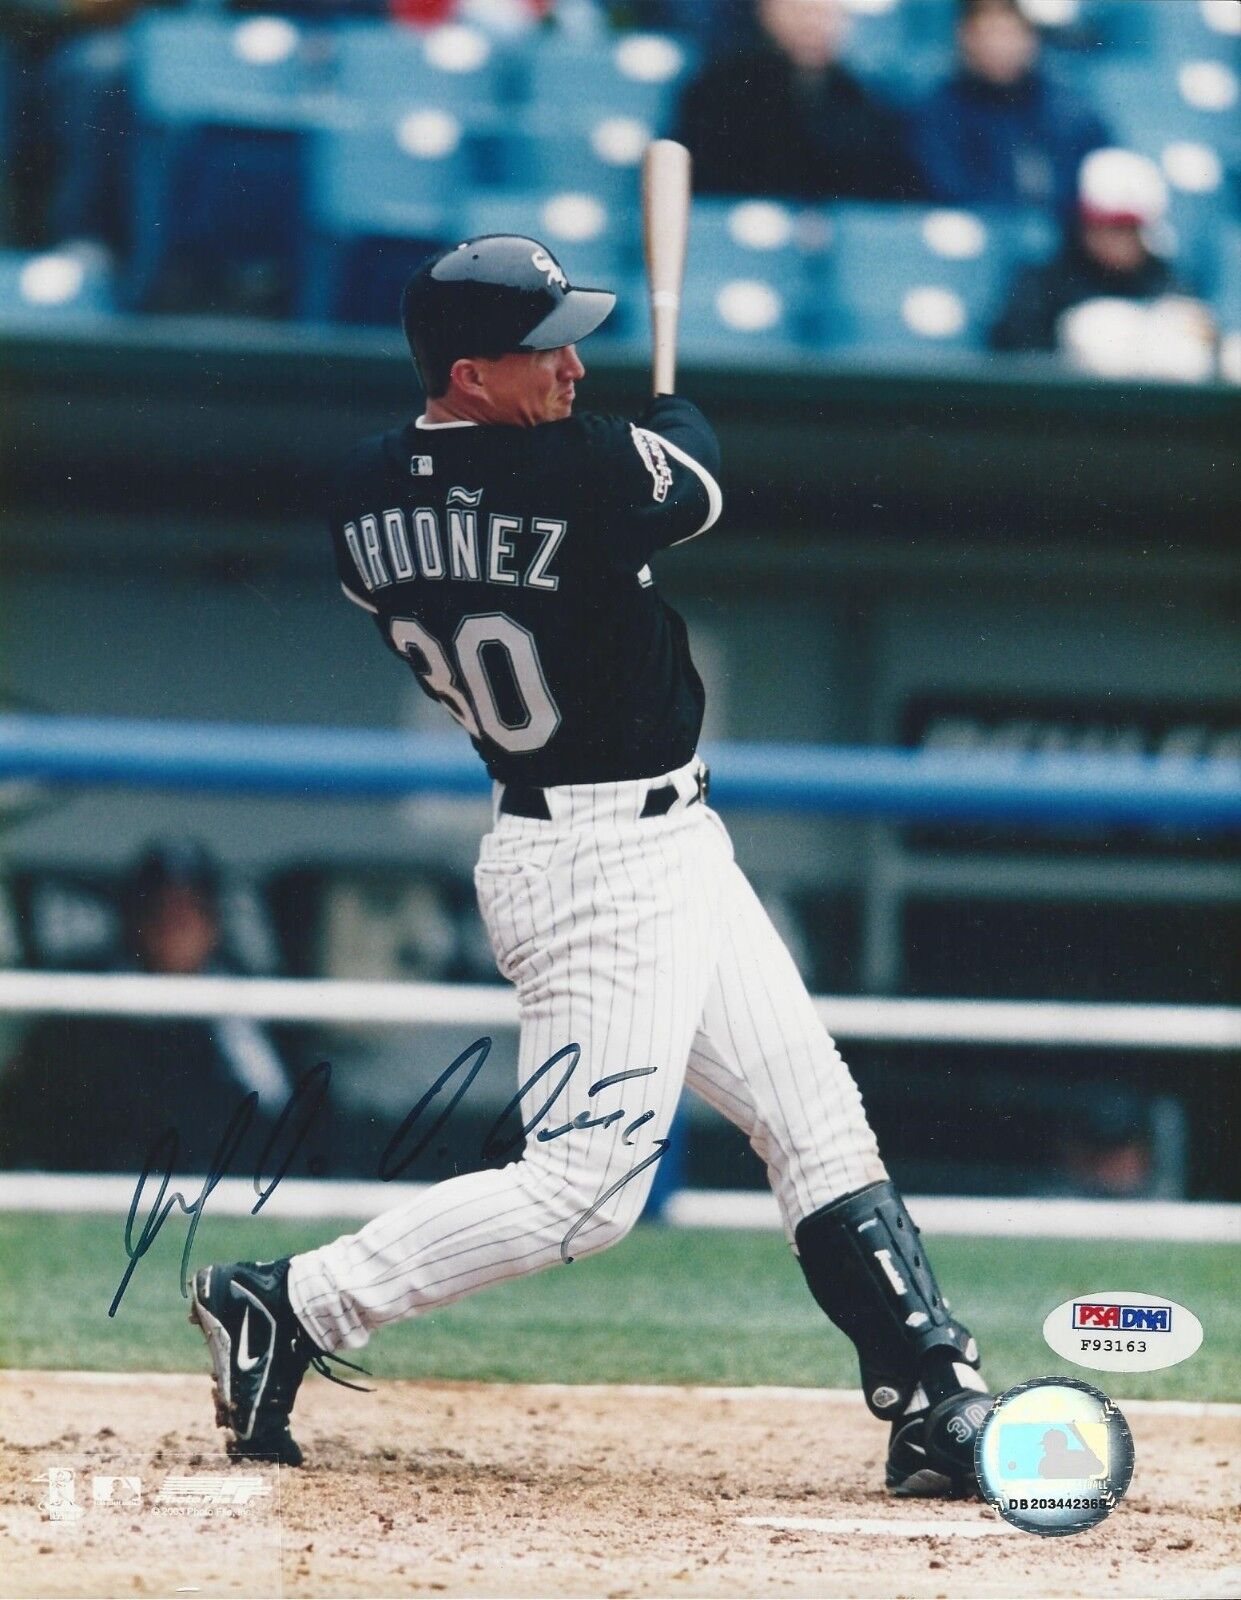 Magglio Ordonez Chicago White Sox signed 8x10 Photo Poster painting PSA/DNA #F93163